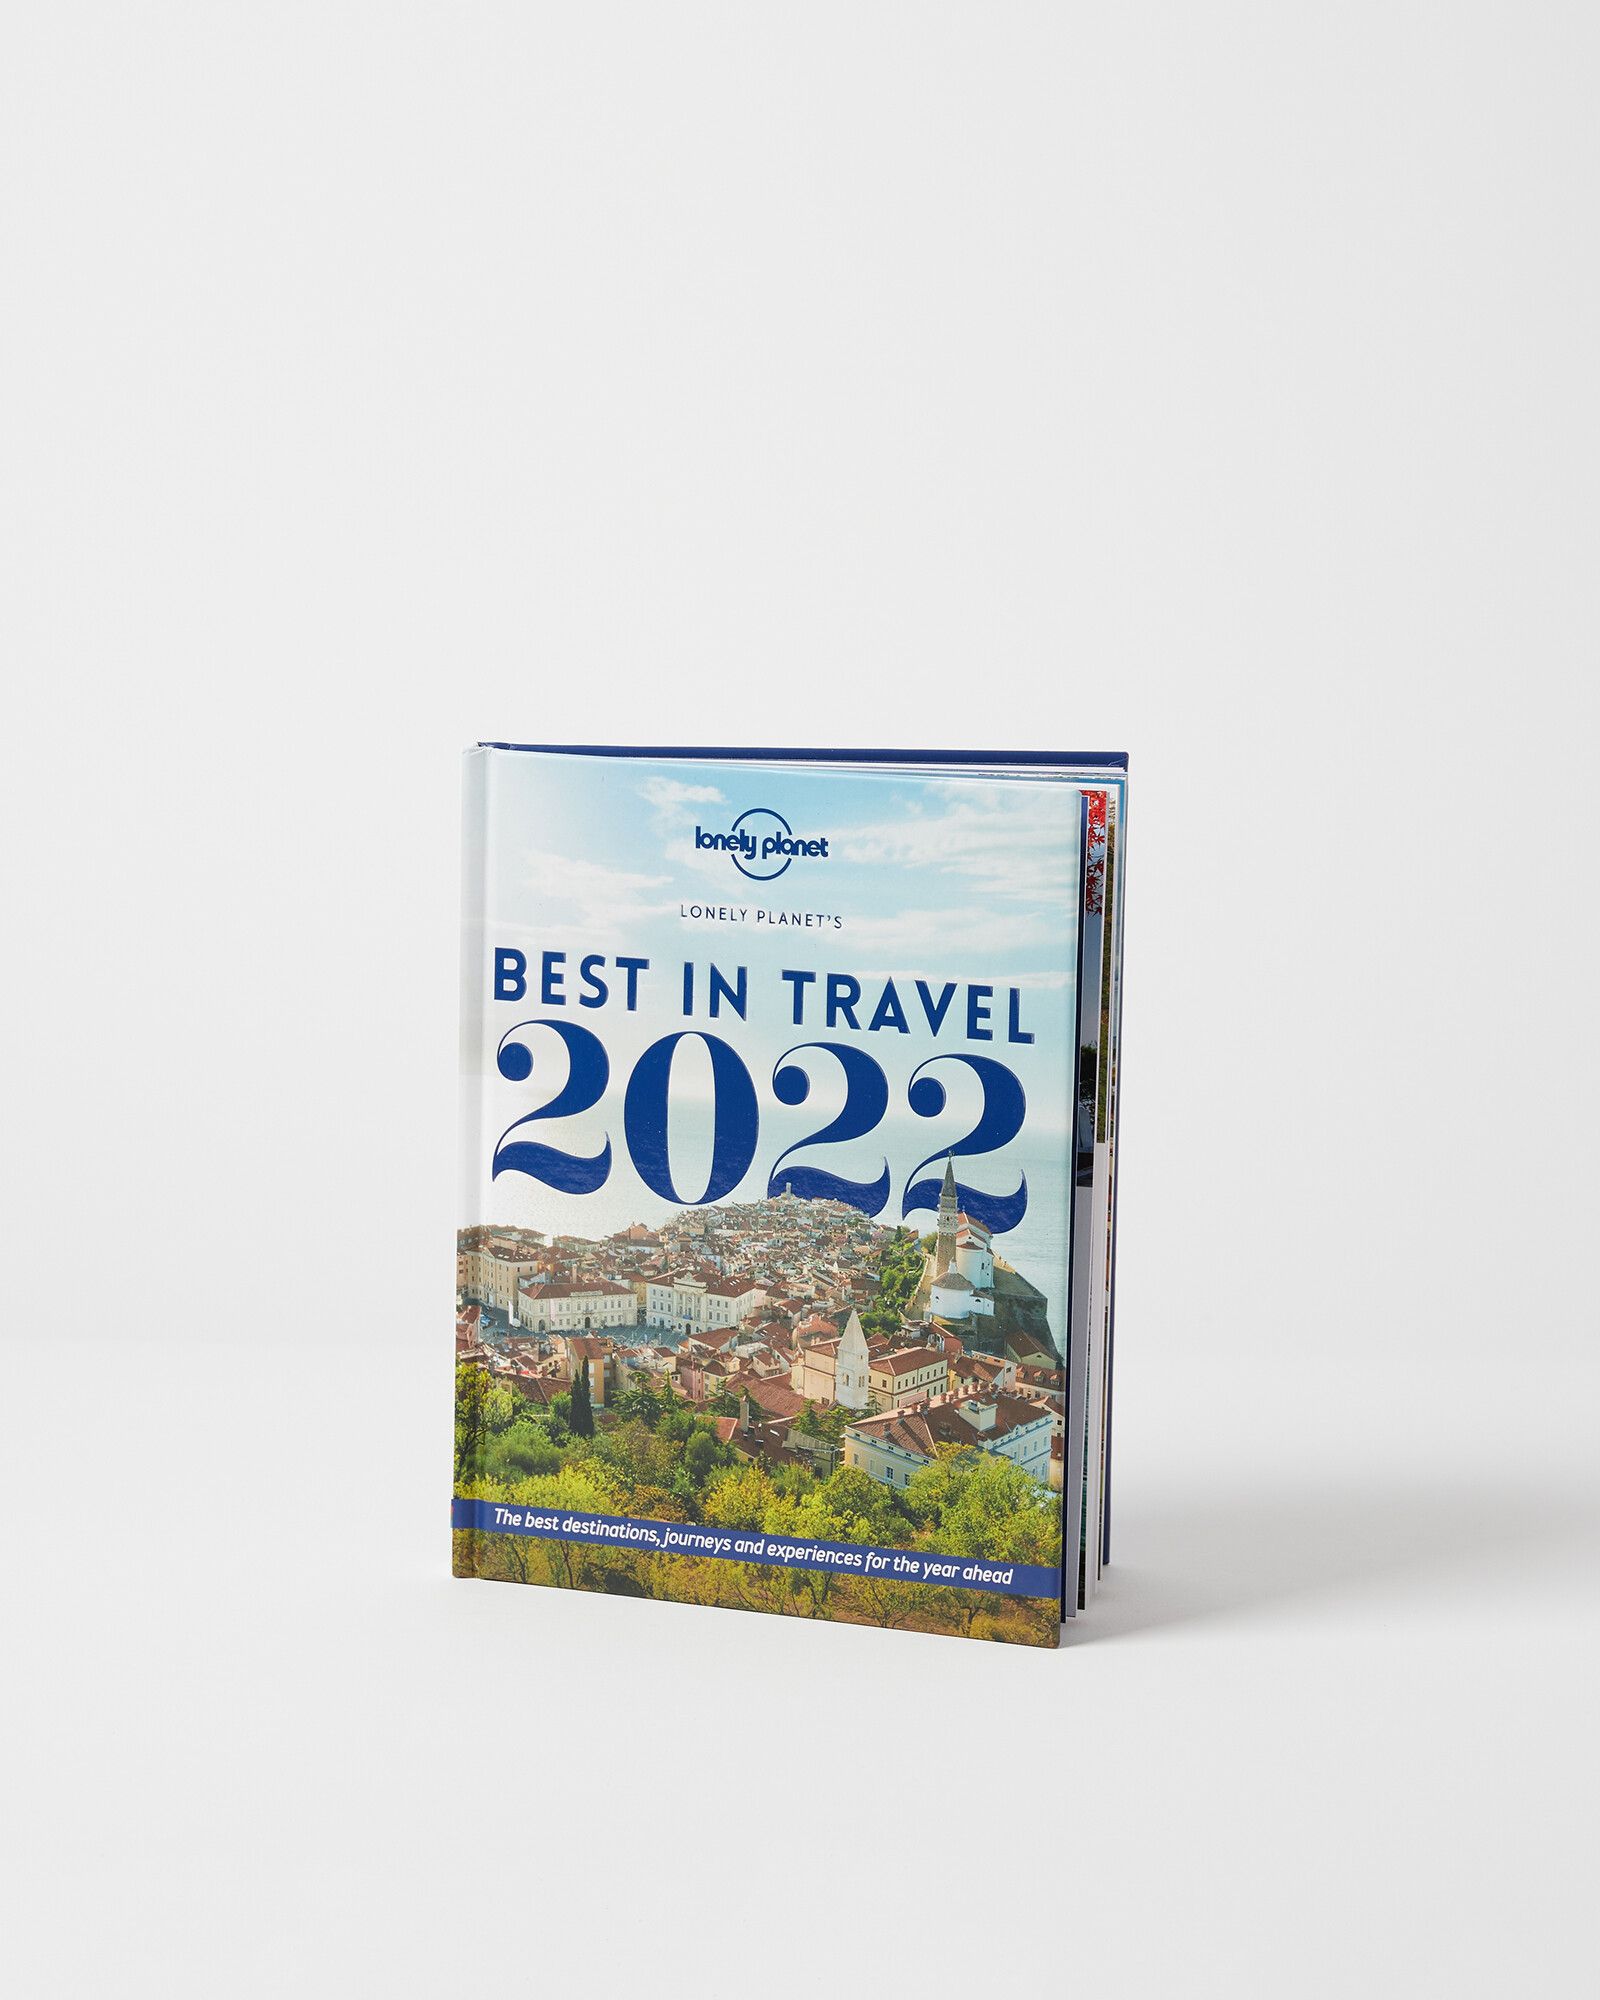 2022　Lonely　Best　Travel　Bonas　Planet's　Oliver　in　Book